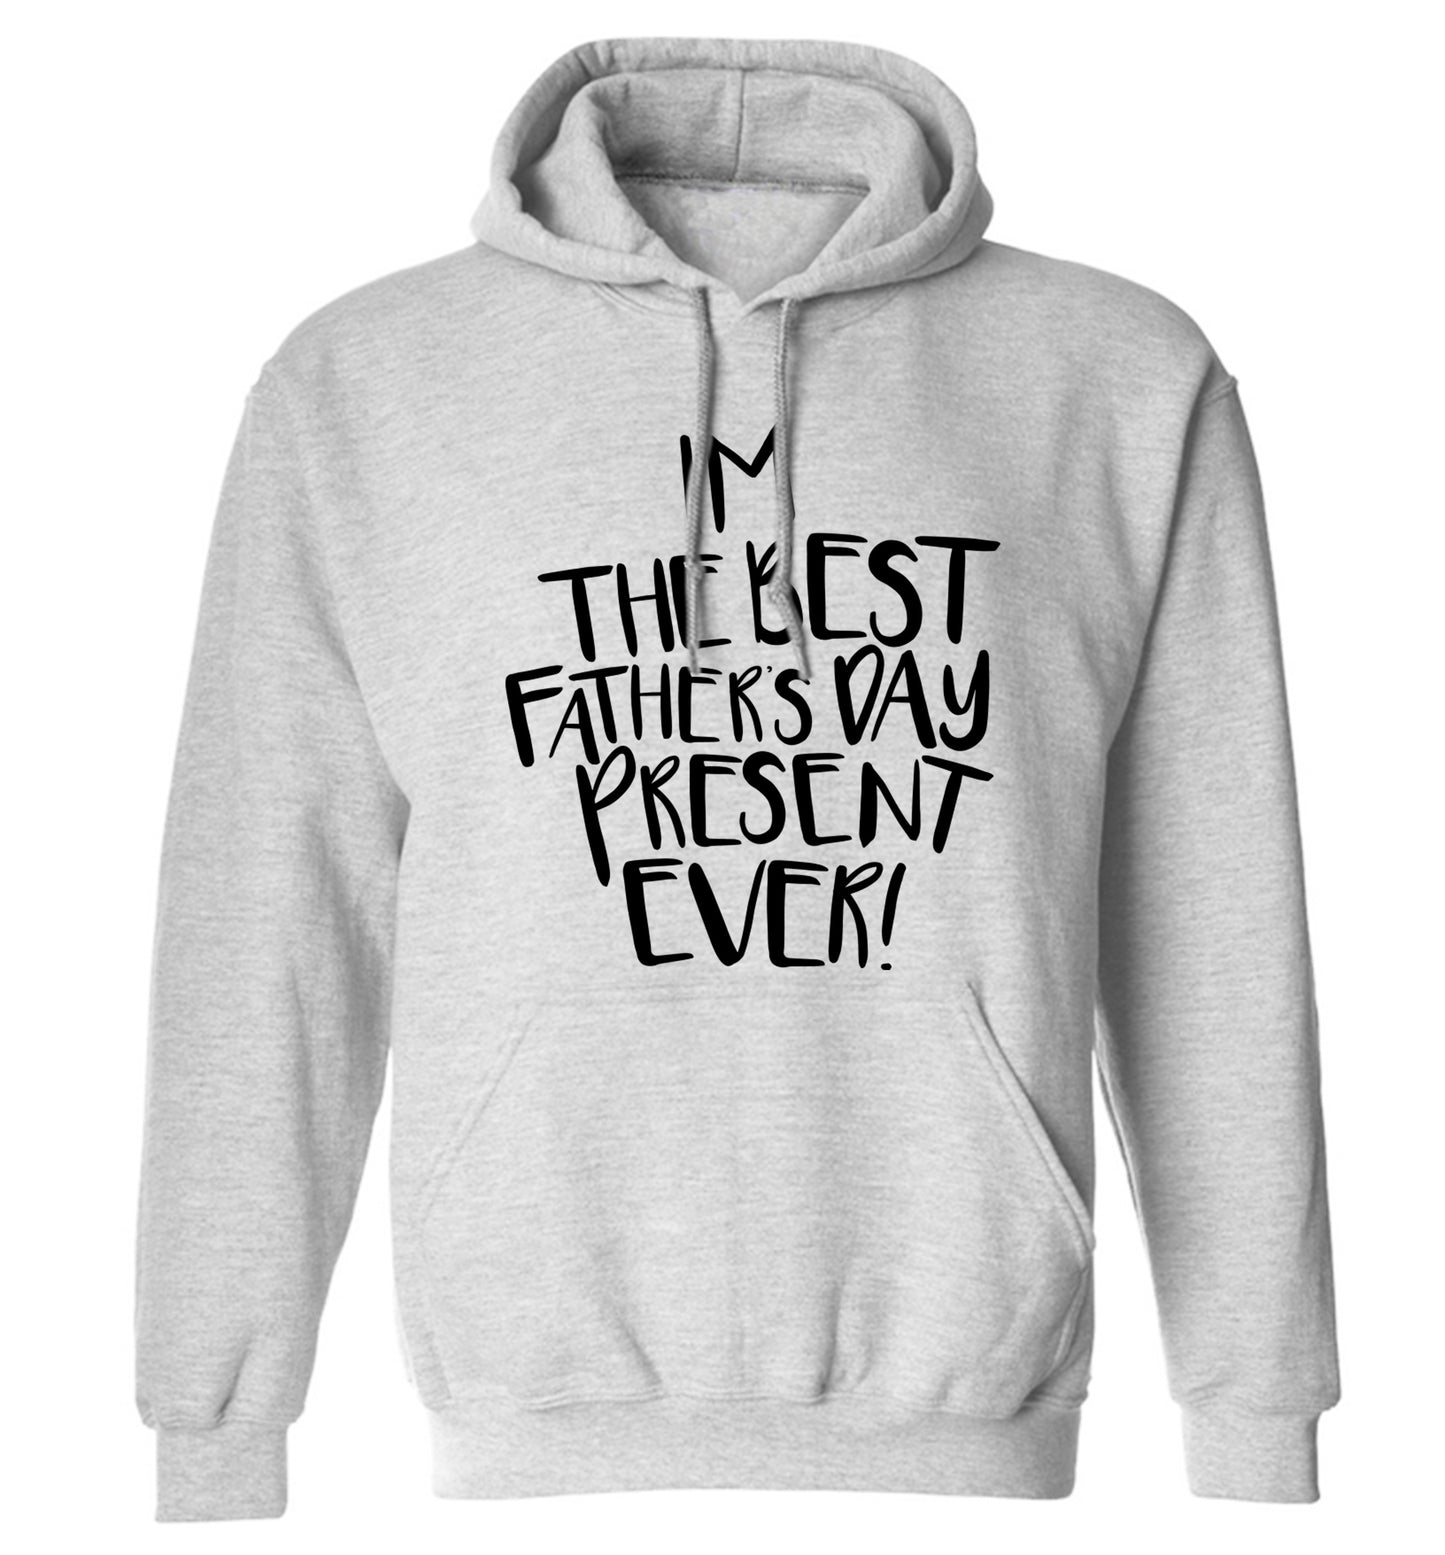 I'm the best father's day present ever! adults unisex grey hoodie 2XL